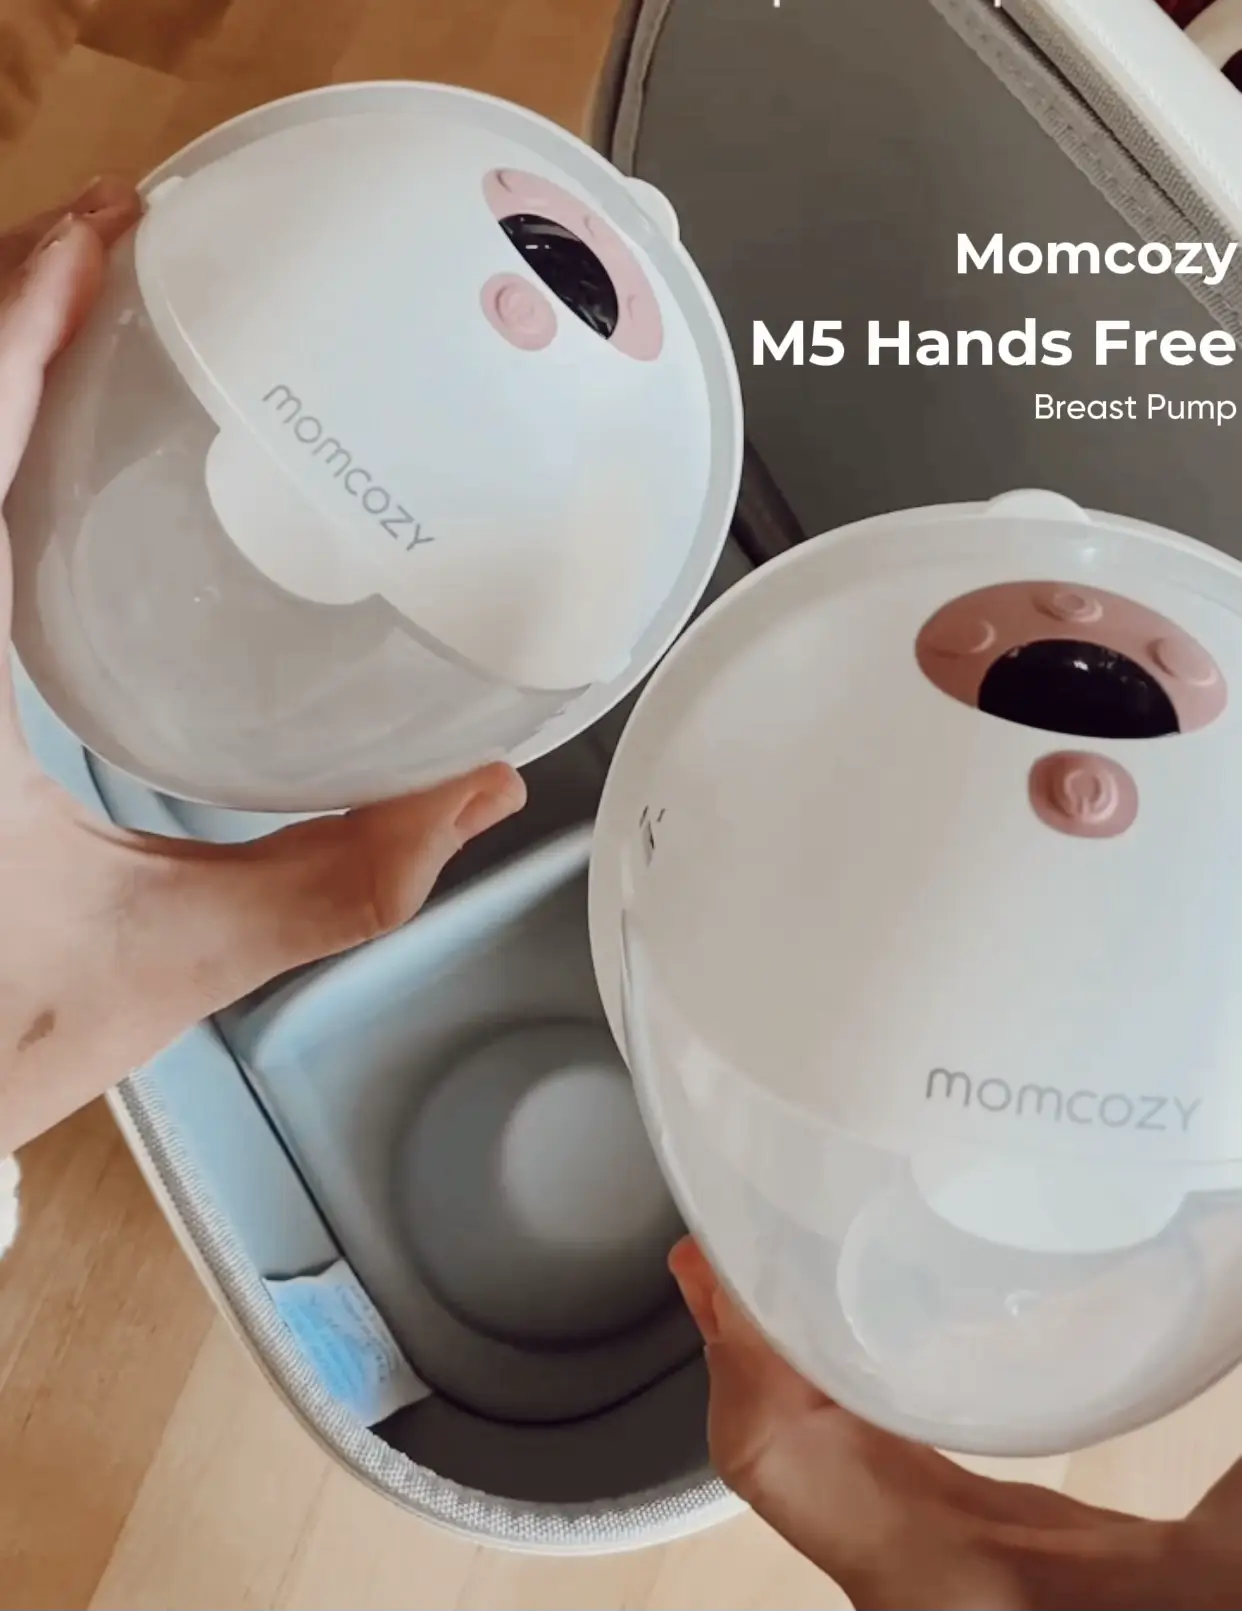 All you breastfeeding mamas, you need to get yourself these momcozy nu